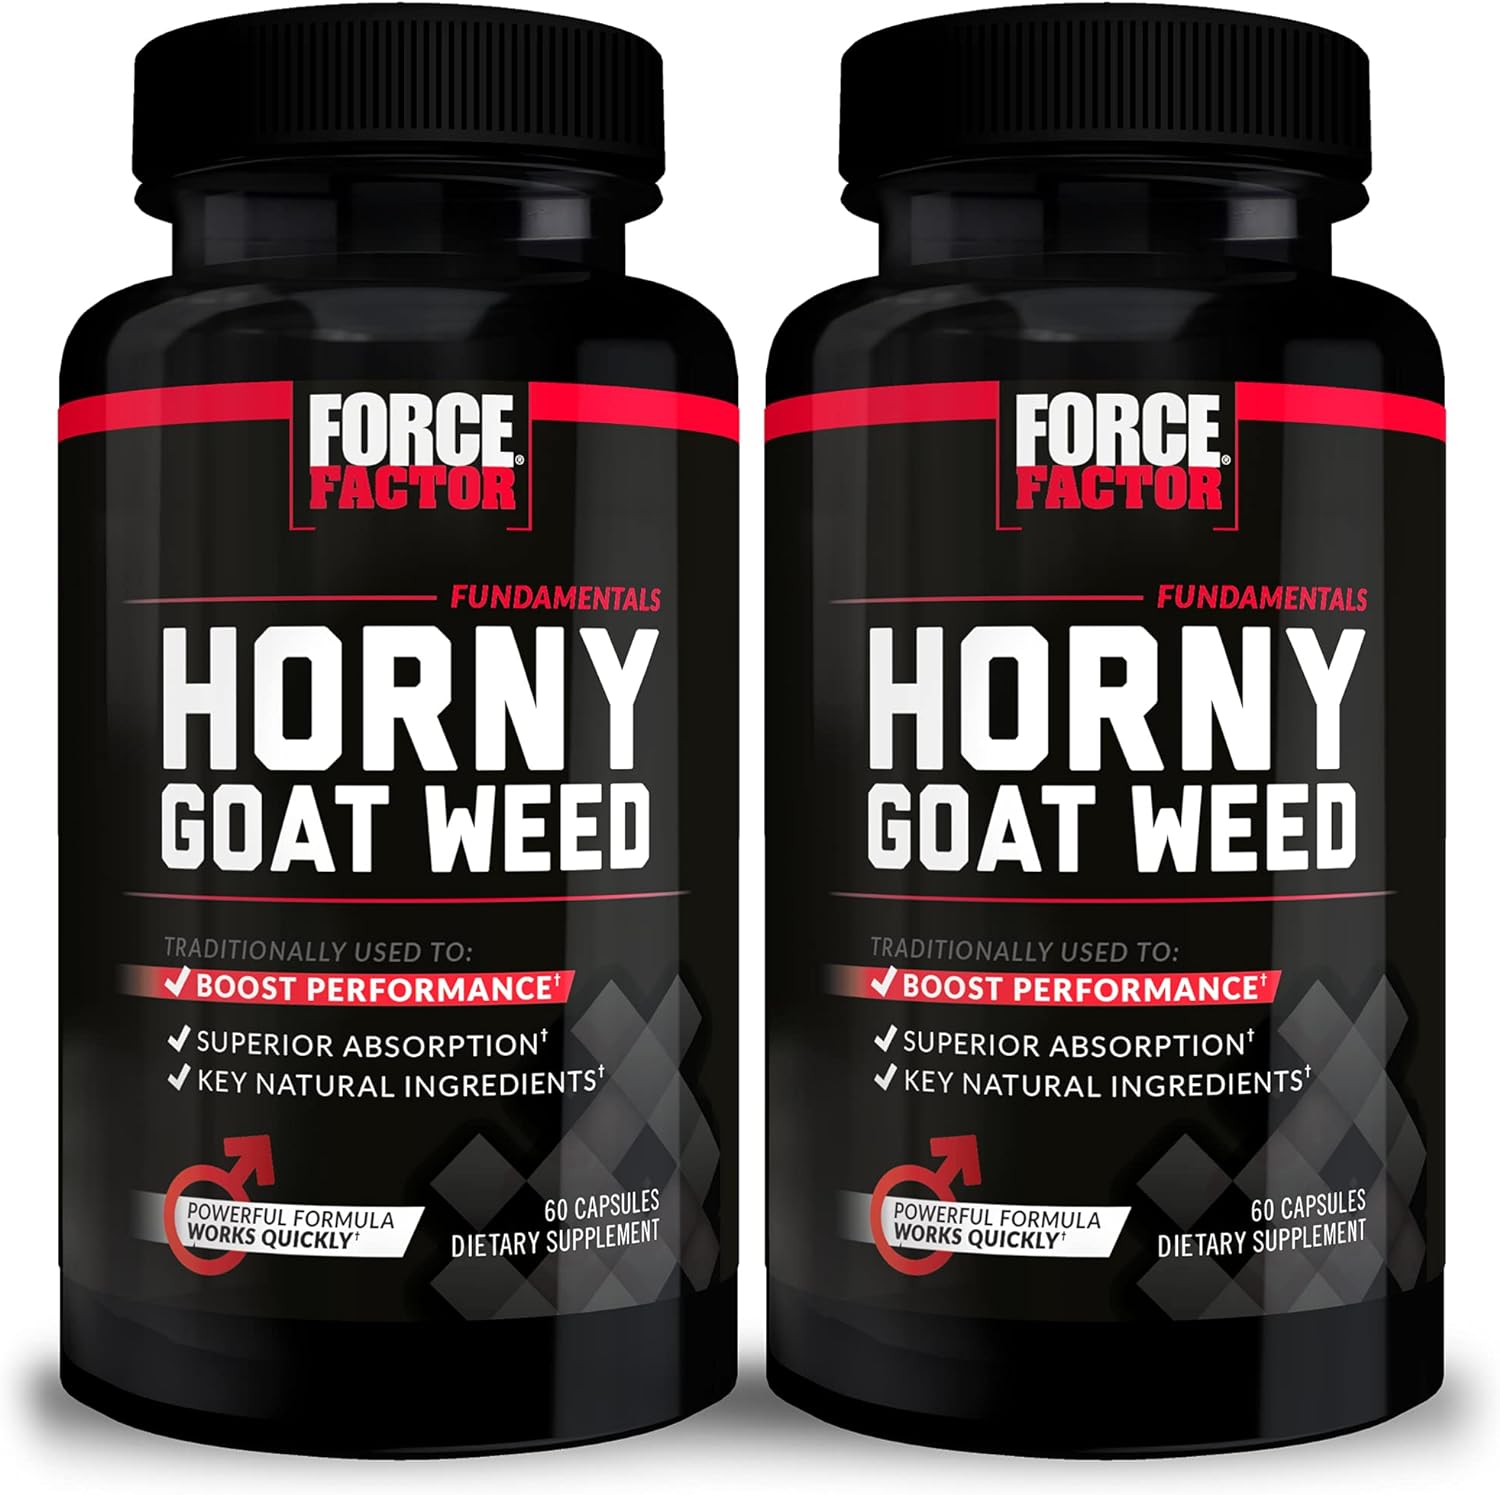 Force Factor Horny Goat Weed for Men, Natural Male Drive and Vitality Supplement with Natural Ingredients for Superior Absorption, Fundamental Series, 750mg, 60 Count (Pack of 2)